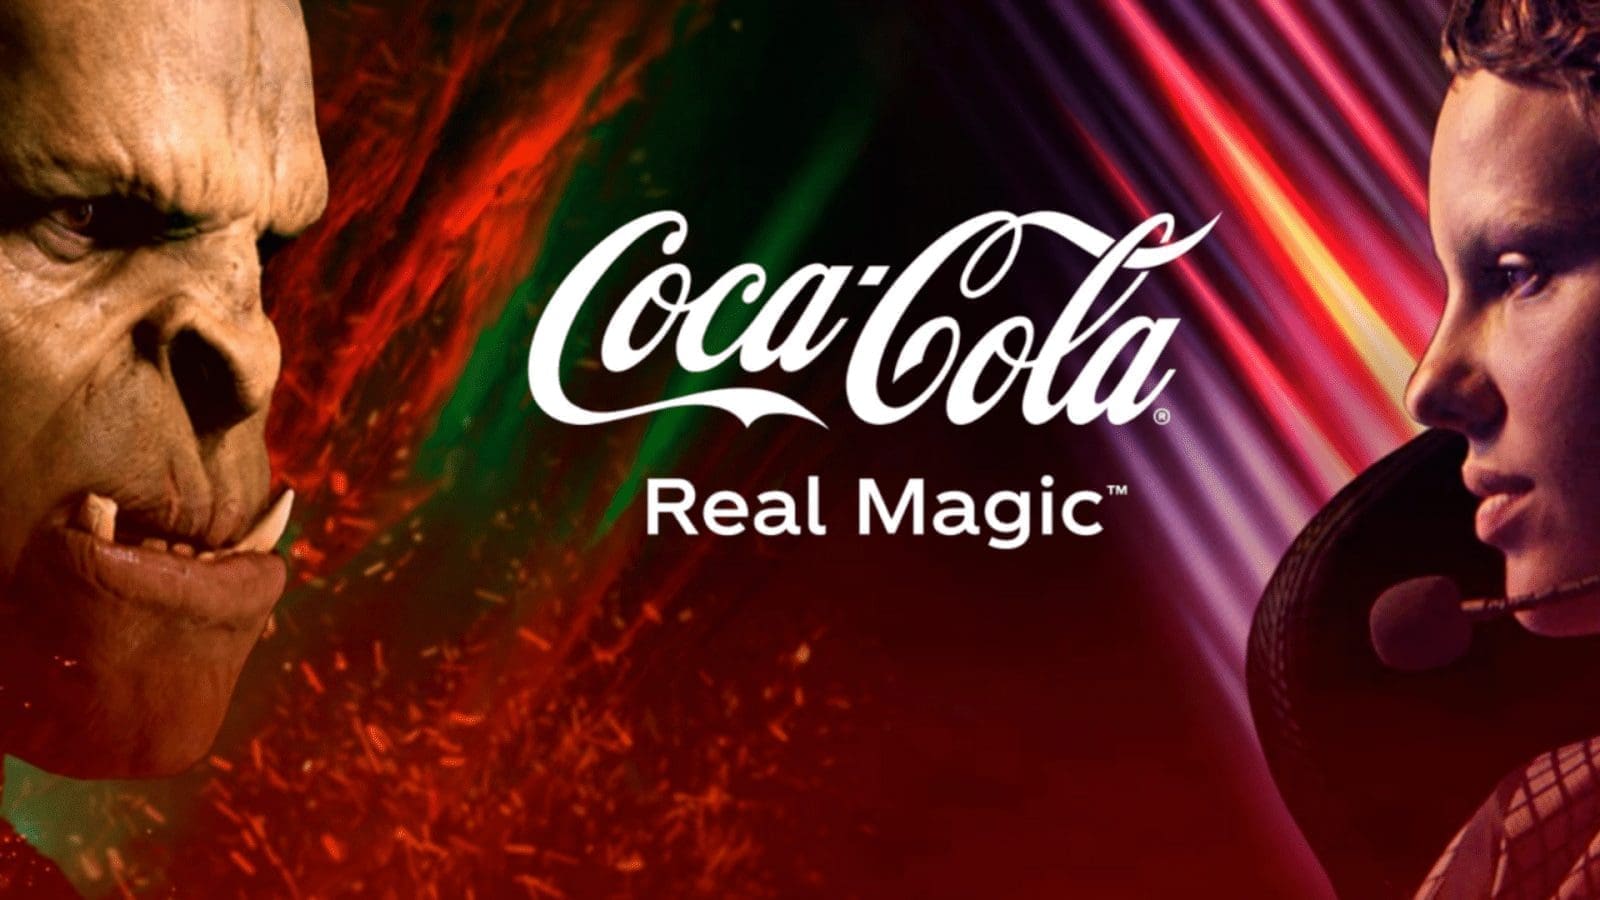 Coca-cola unveils first global campaign in 5 years to recapture interest of consumers